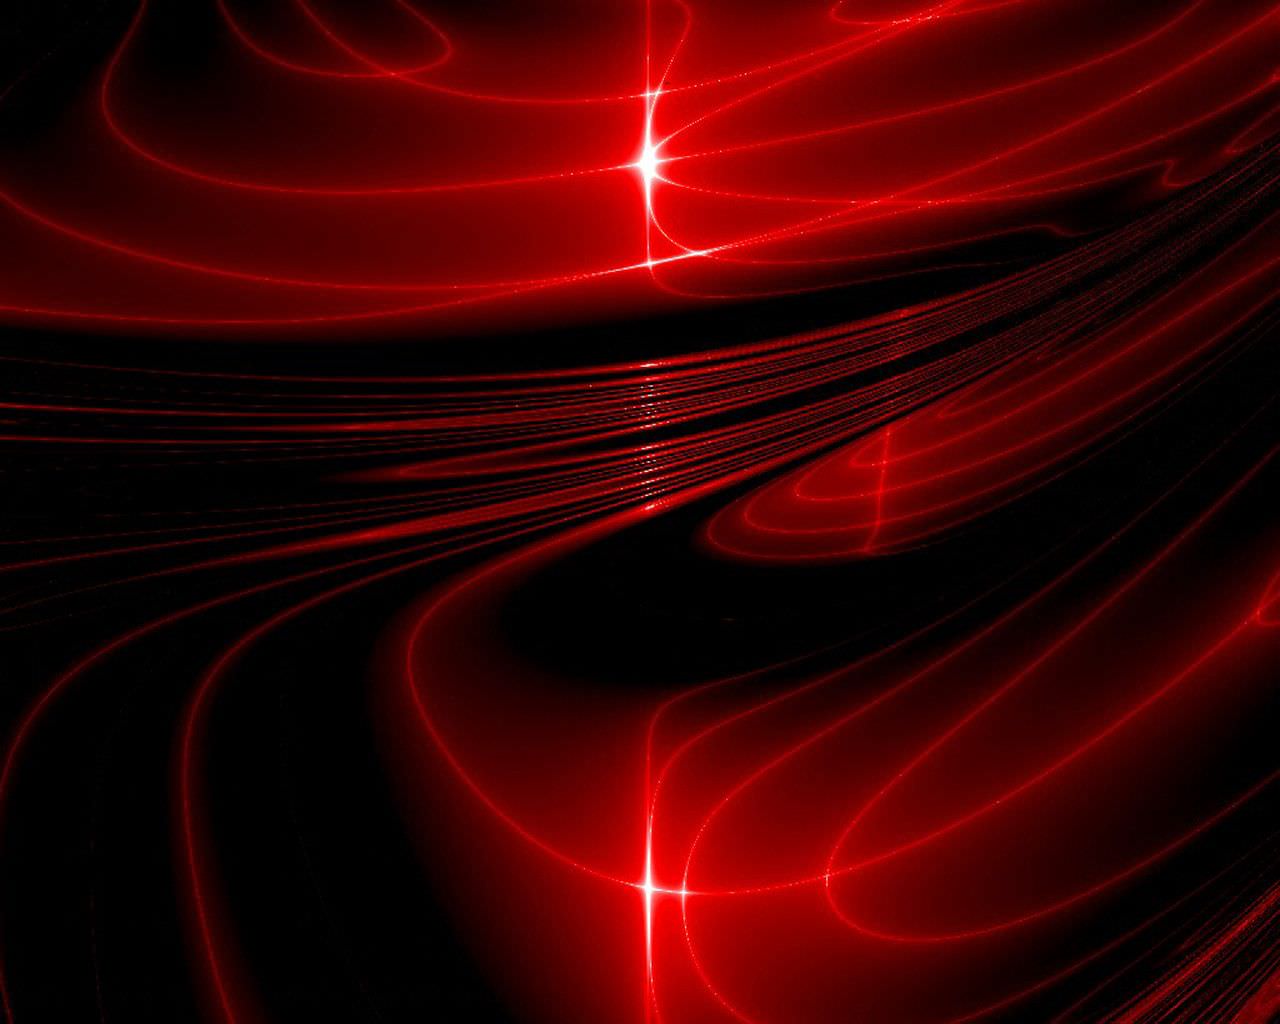 Abstract Red & Black Wallpaper